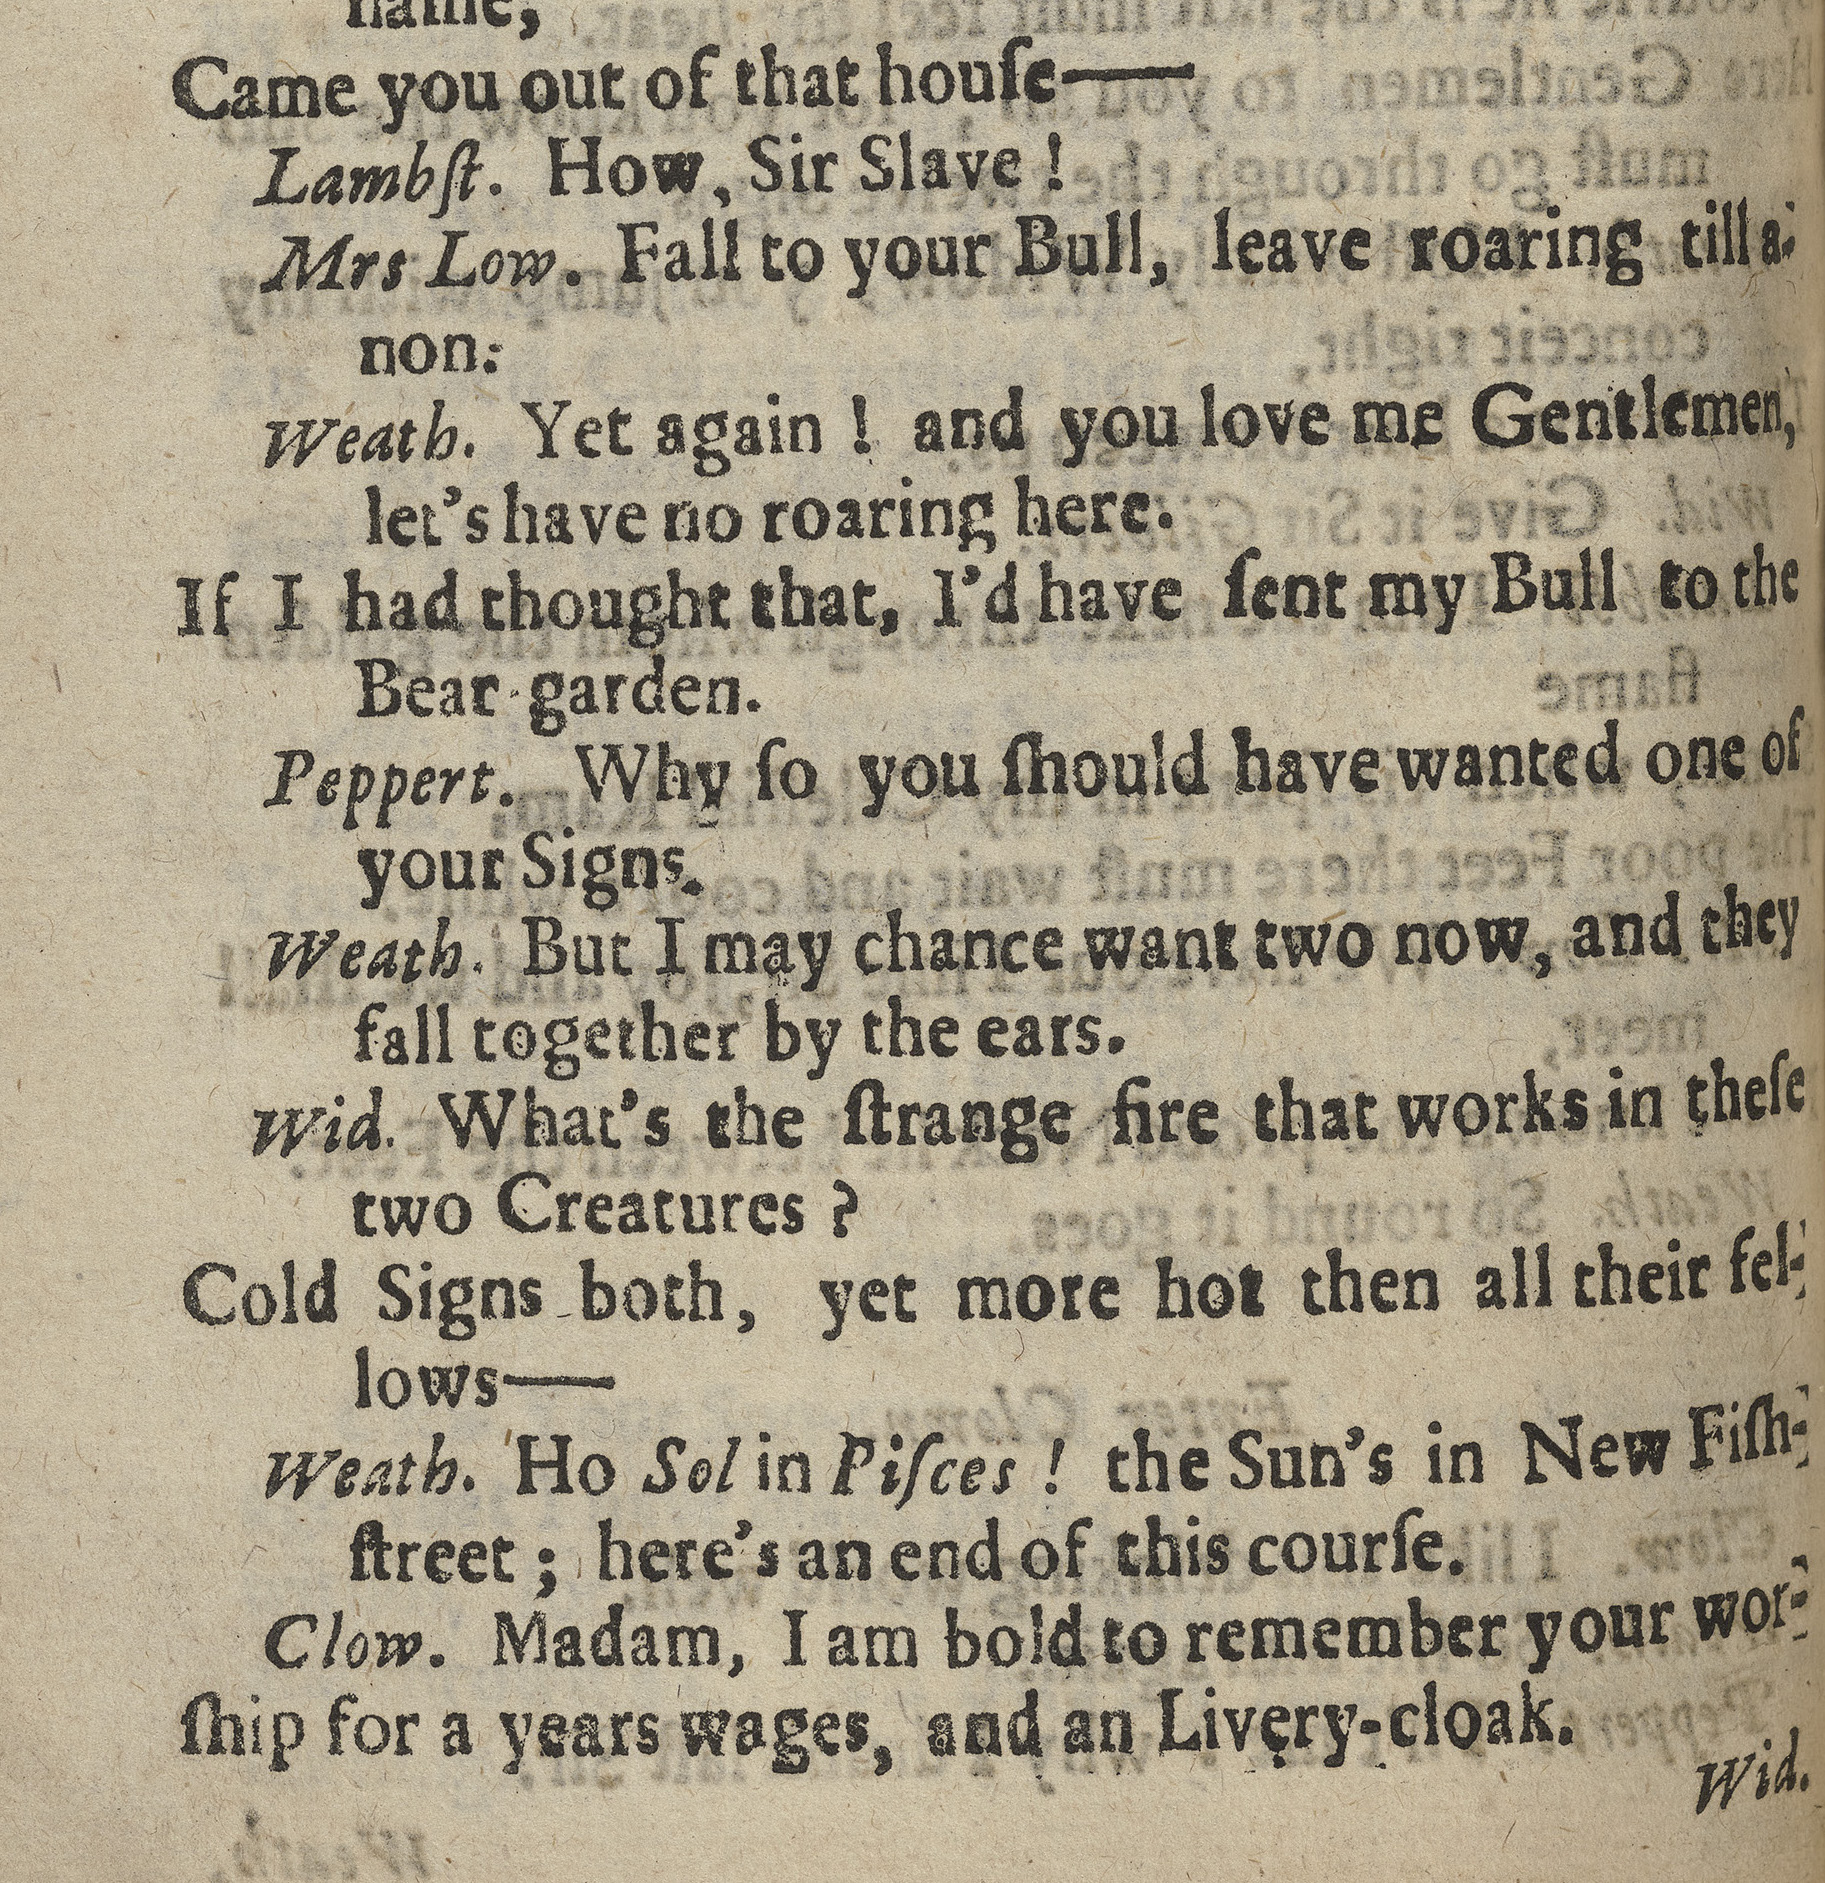 Thomas Middleton (? – 1627). No wit, help like a vvomans (London, 1657), 44. STC 165173. Used by permission of the Folger Shakespeare Library.